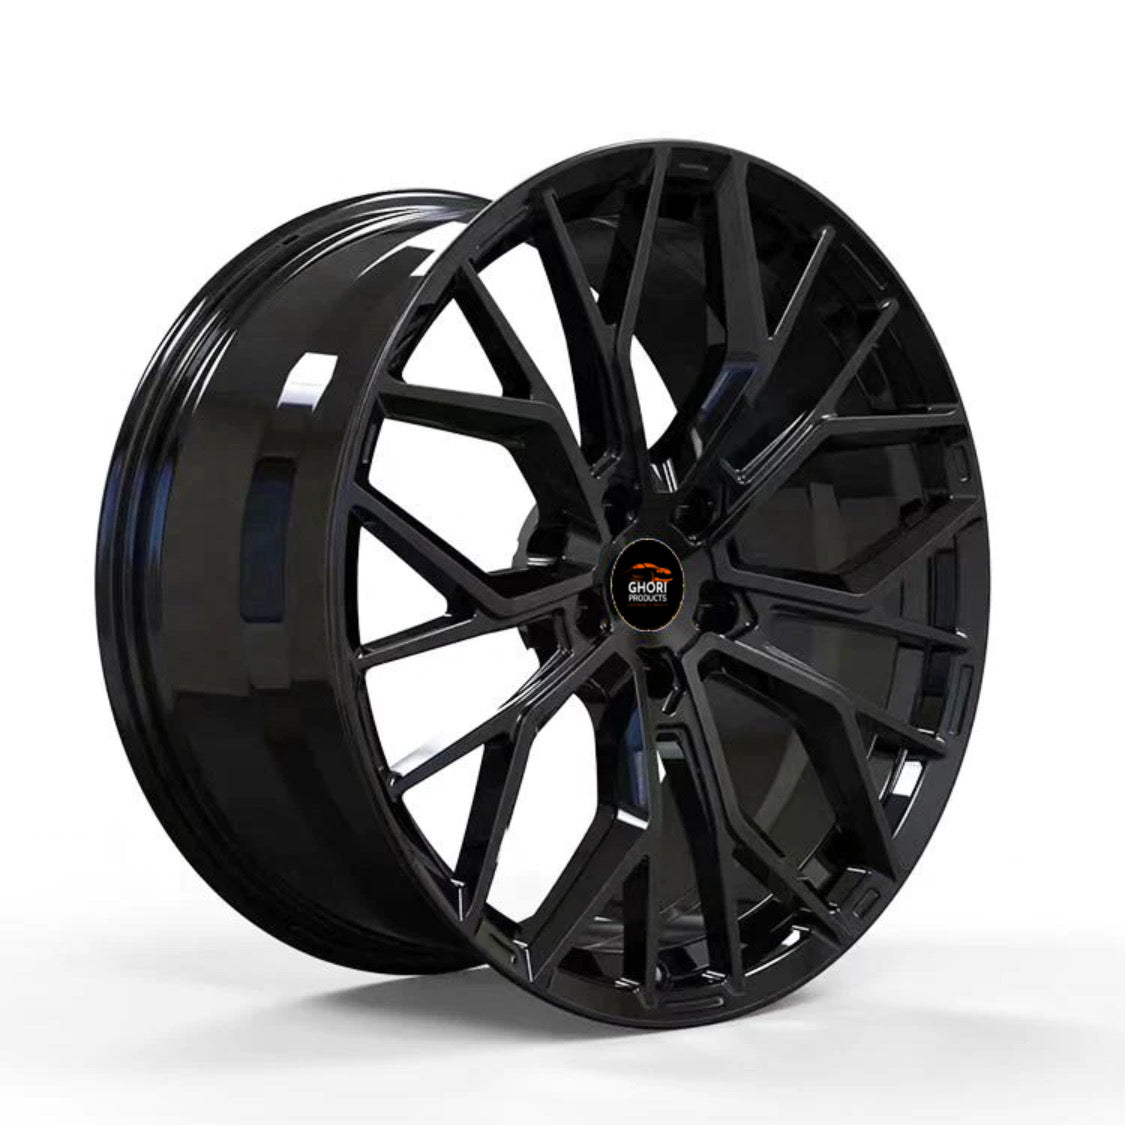 Stealth Force - Forged Aluminum T305 Wheels for Tesla Model X 5X120 (Set of 4)